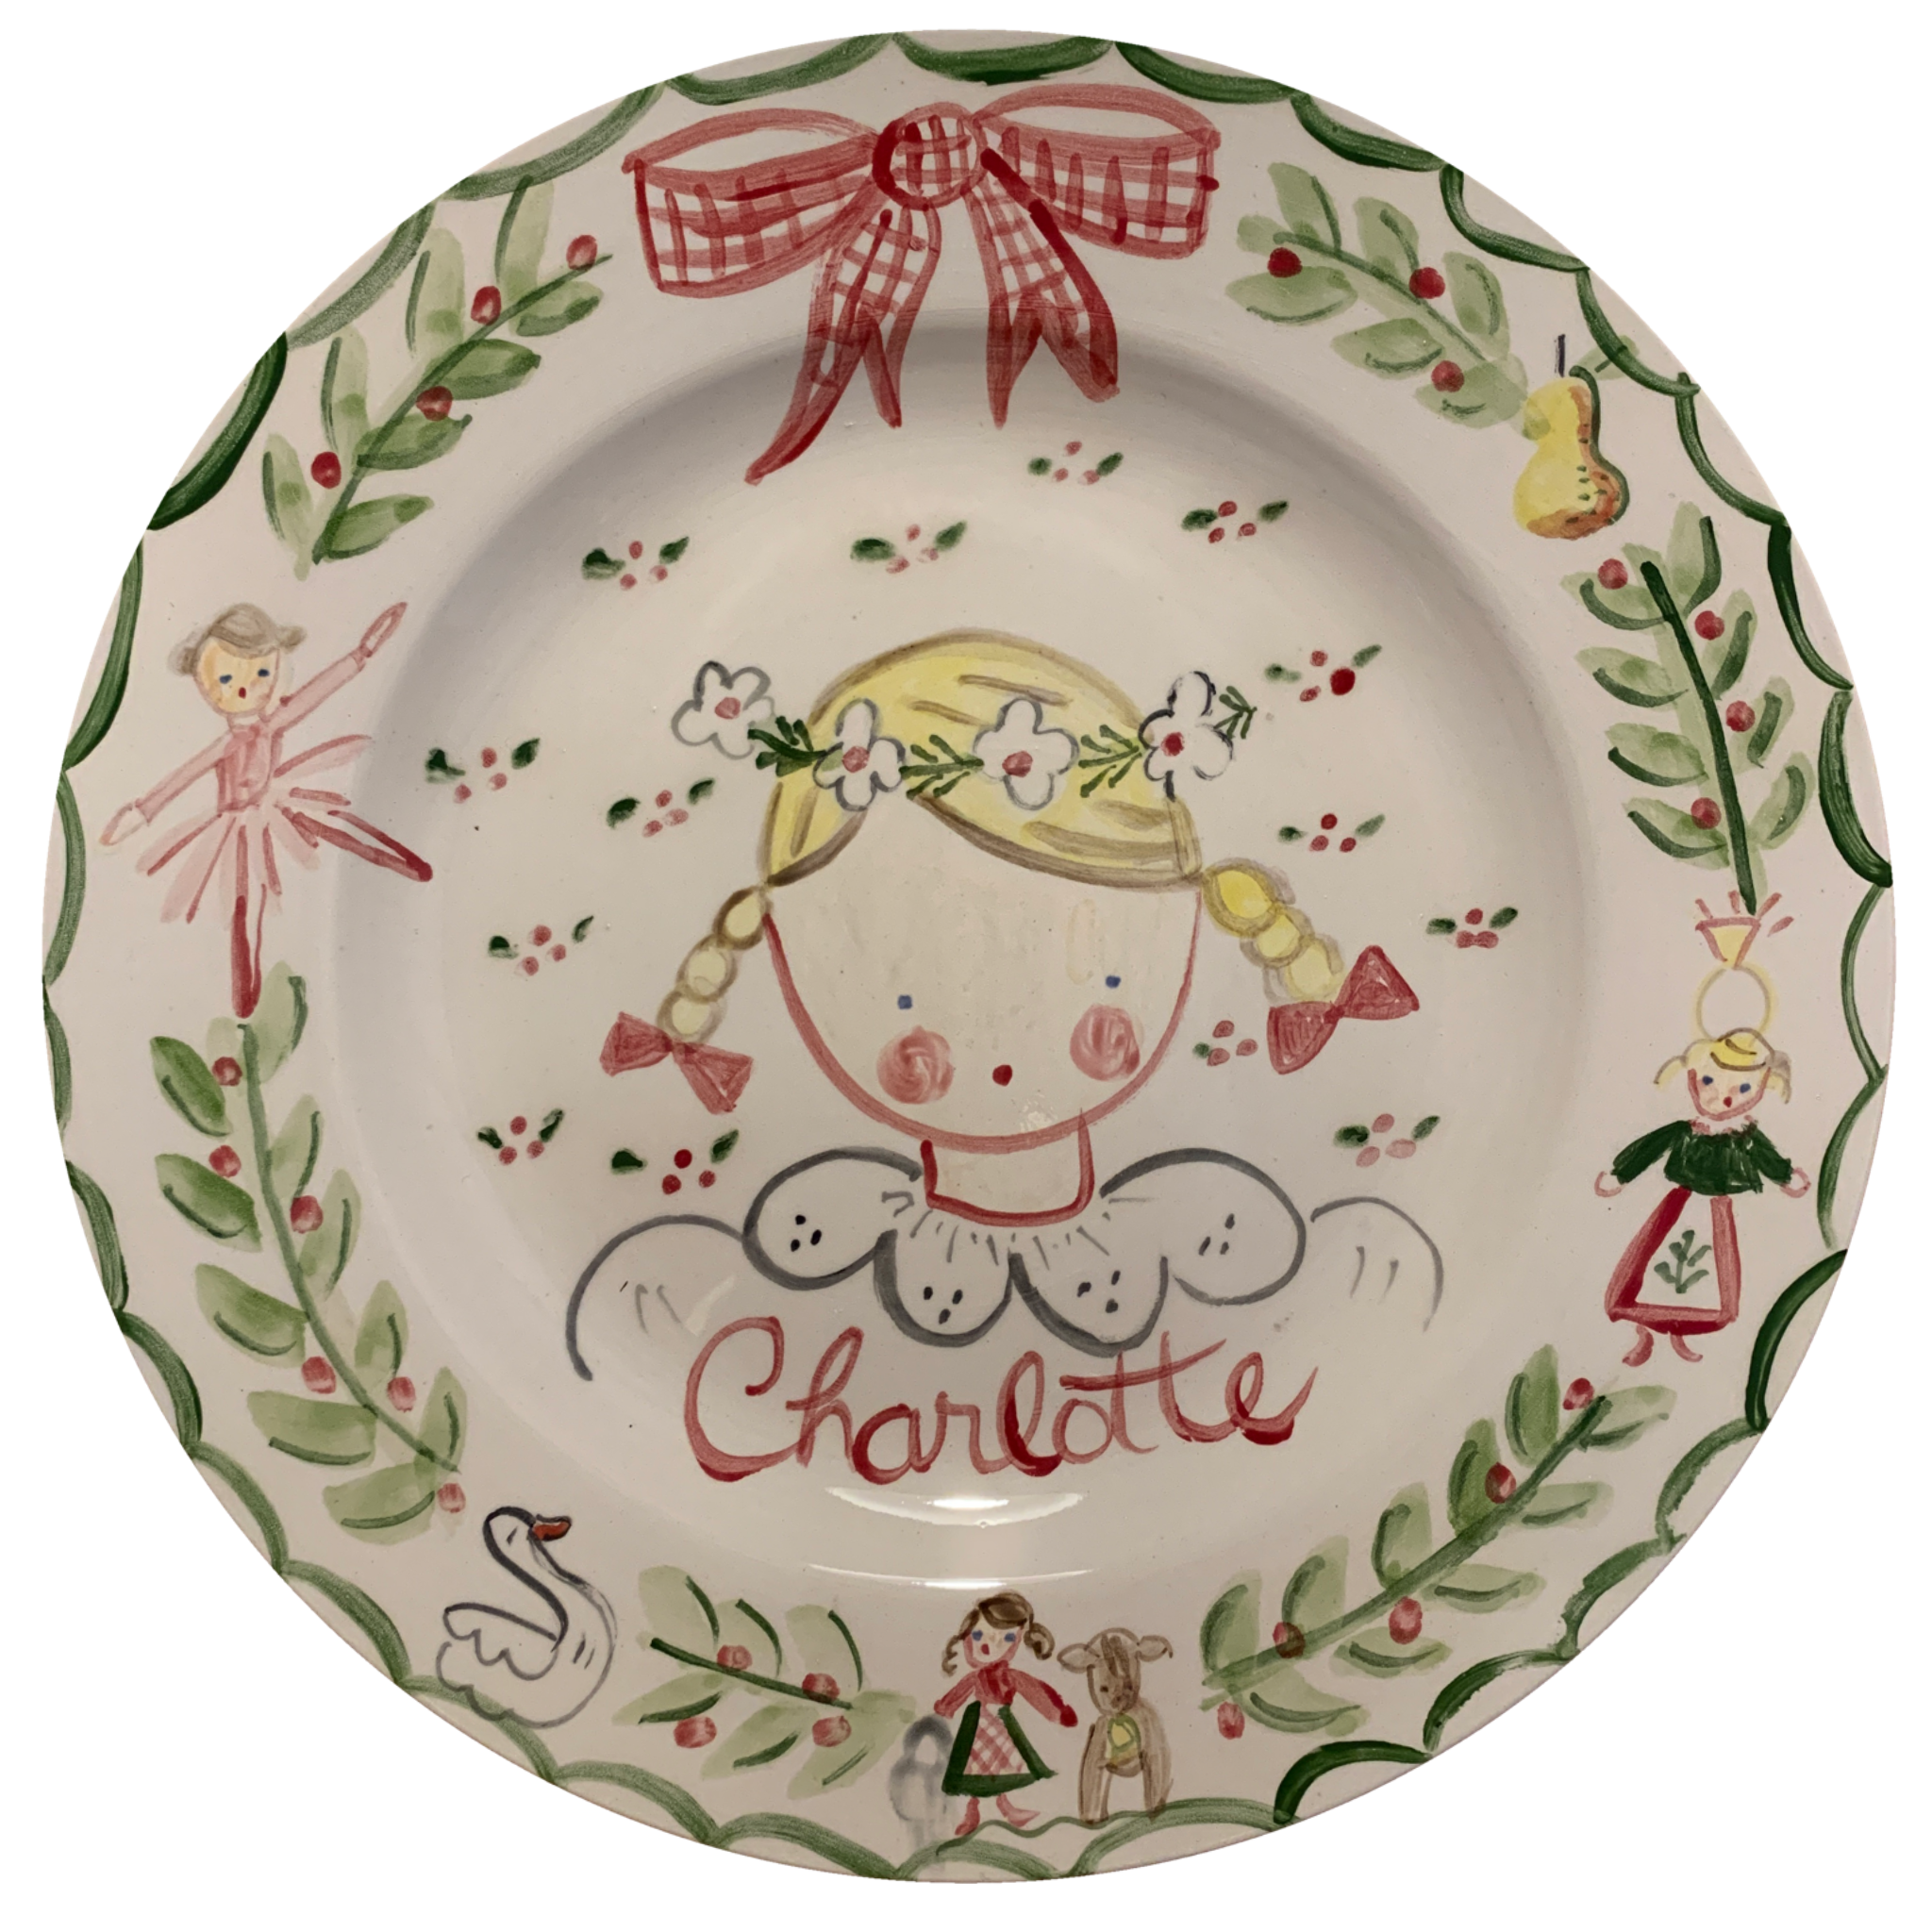 Tricia Lowenfield  - 12 Days of Christmas Plate - Girl - Premium  from Tricia Lowenfield Design 